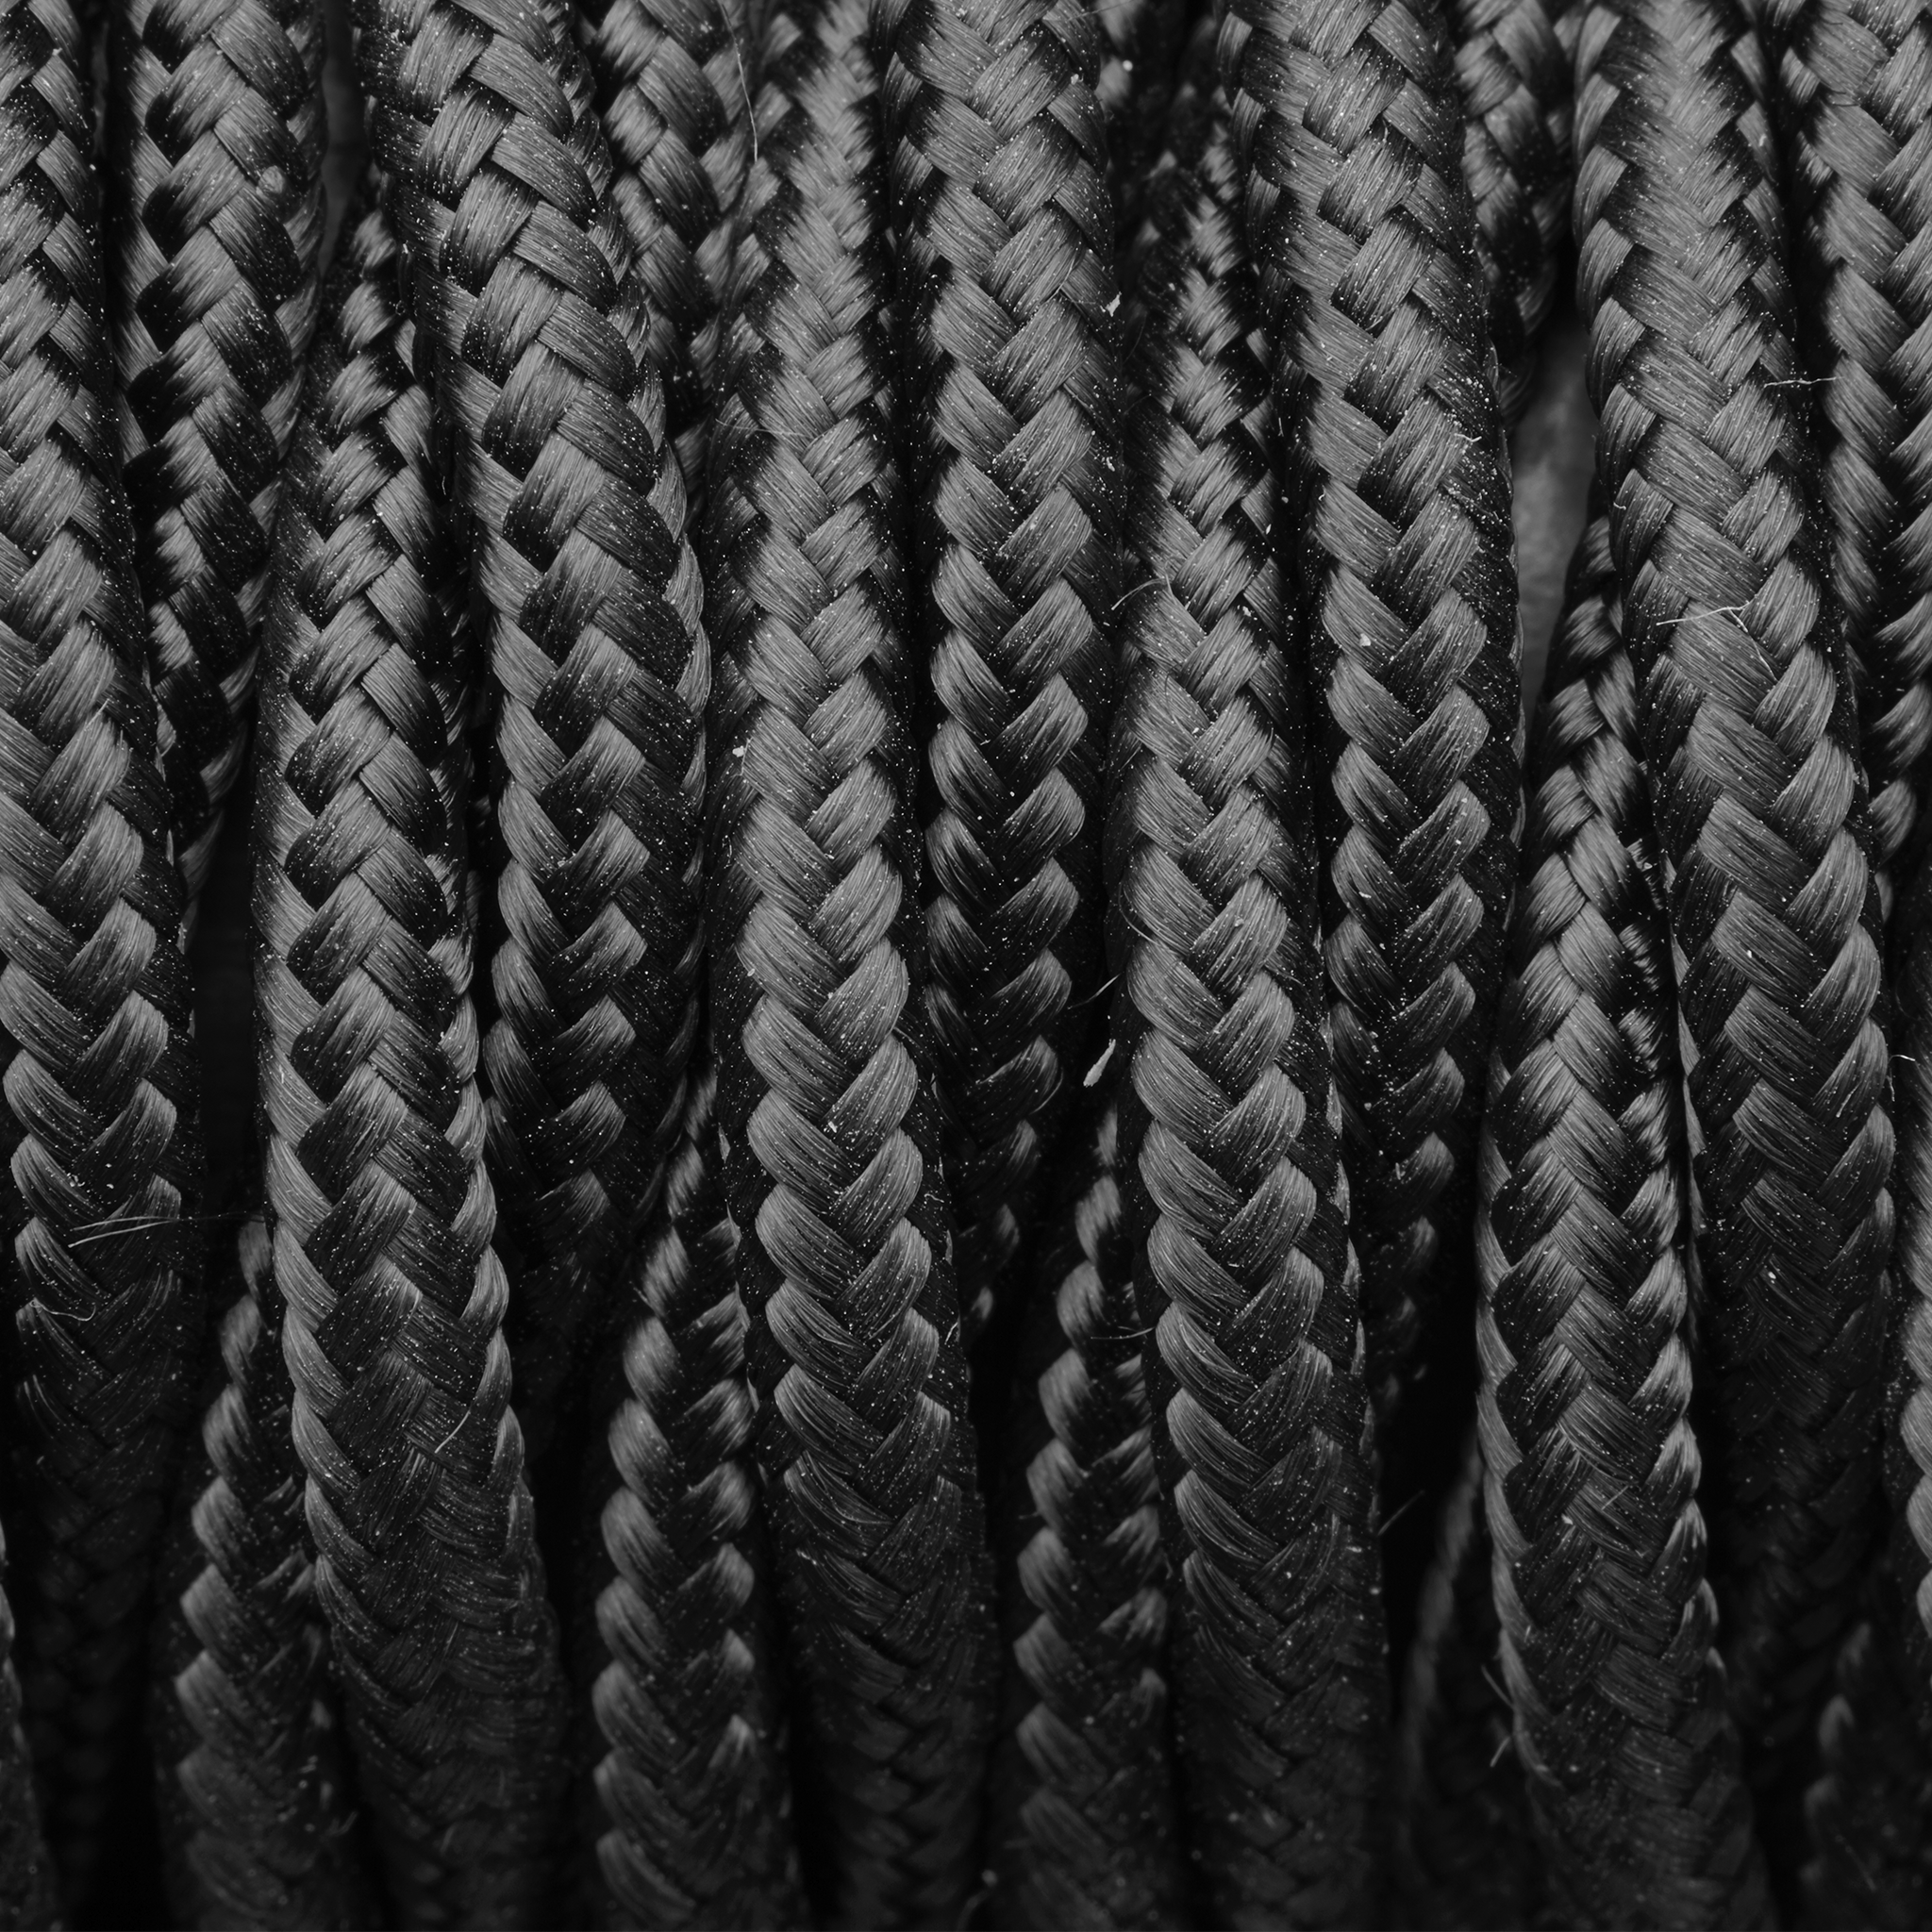 Industville – Twisted Fabric Flex – 3 Core Braided Cloth Cable Lighting Wire – Fabric Flex Cable – Black Colour – Braided Woven Cloth Material – 100 CM